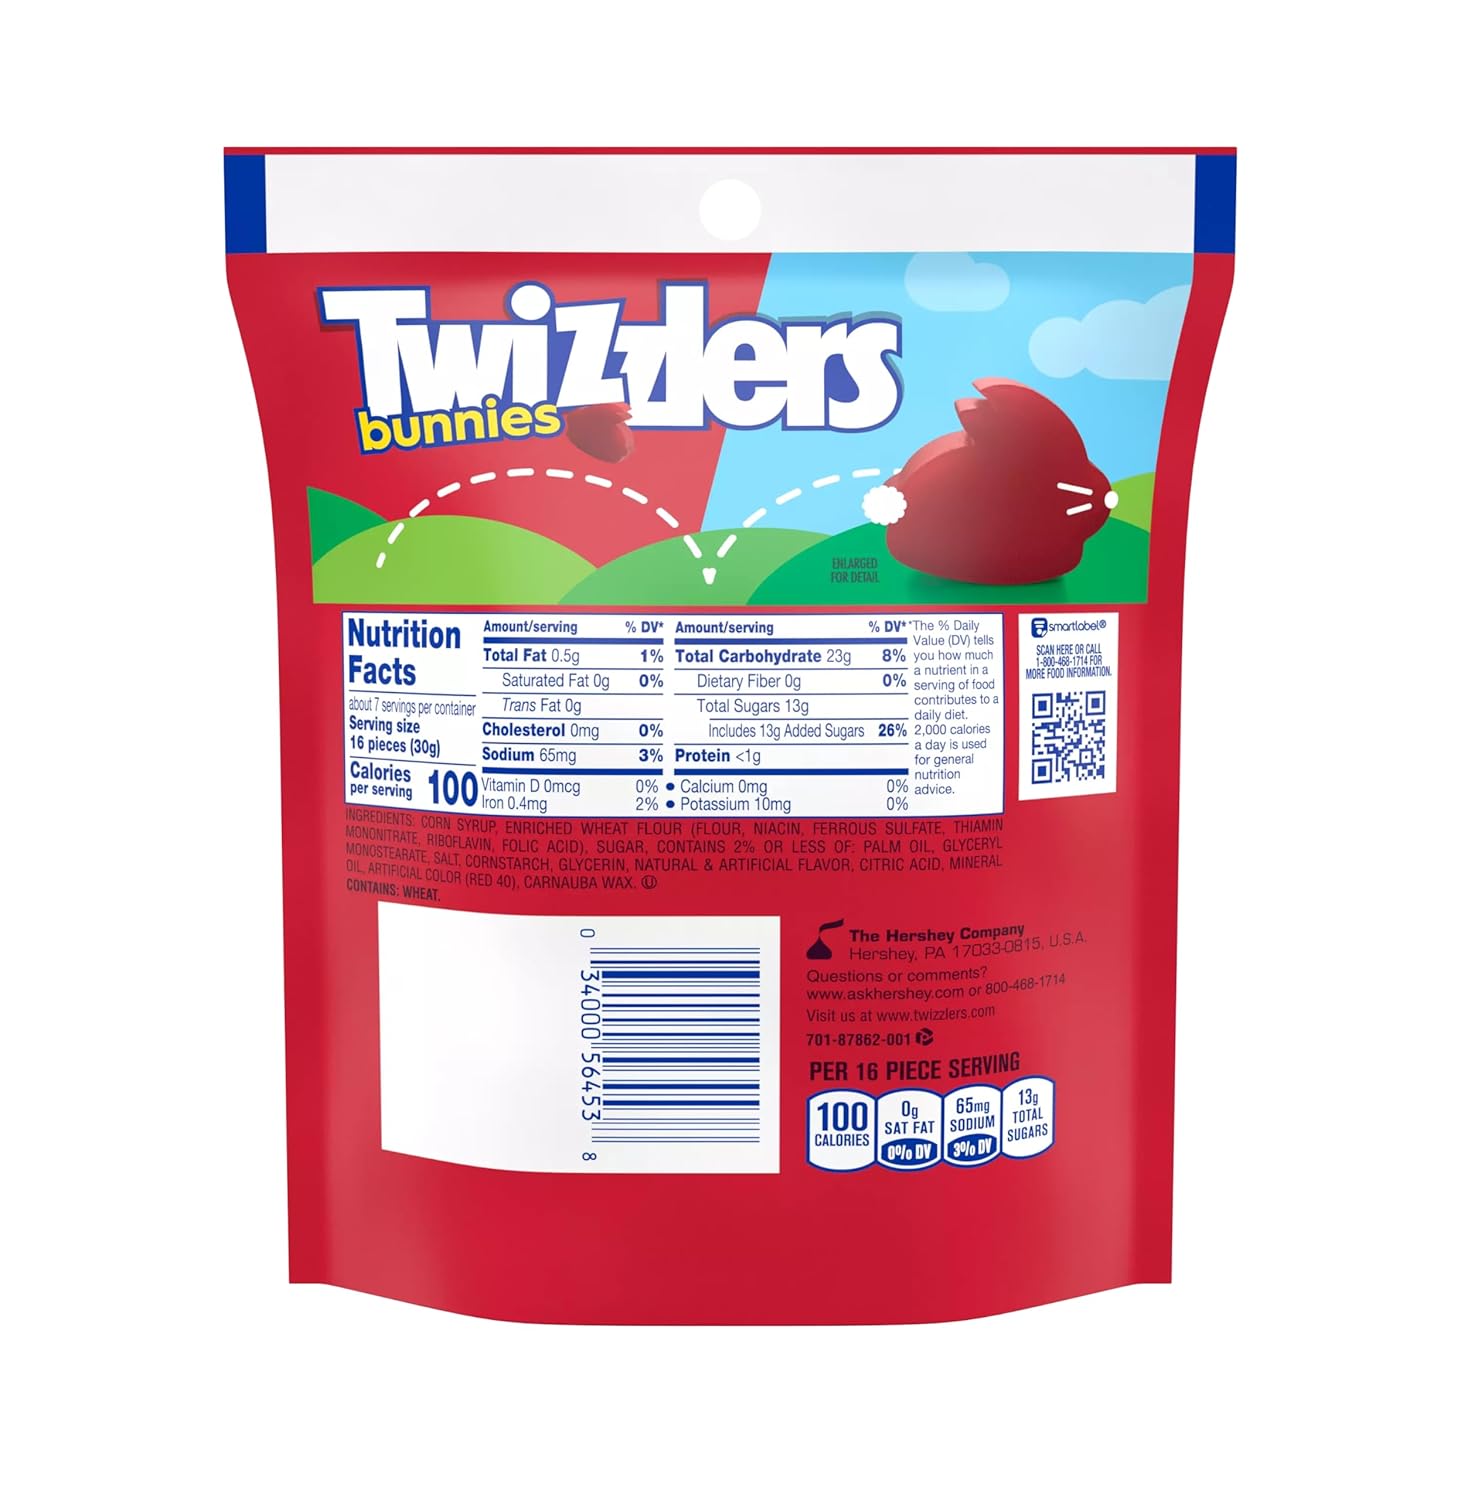 Twizzlers Cherry Bunnies Easter Gummy Candy, Basket Stuffer Gift - Pack of 2-7.1oz Bags